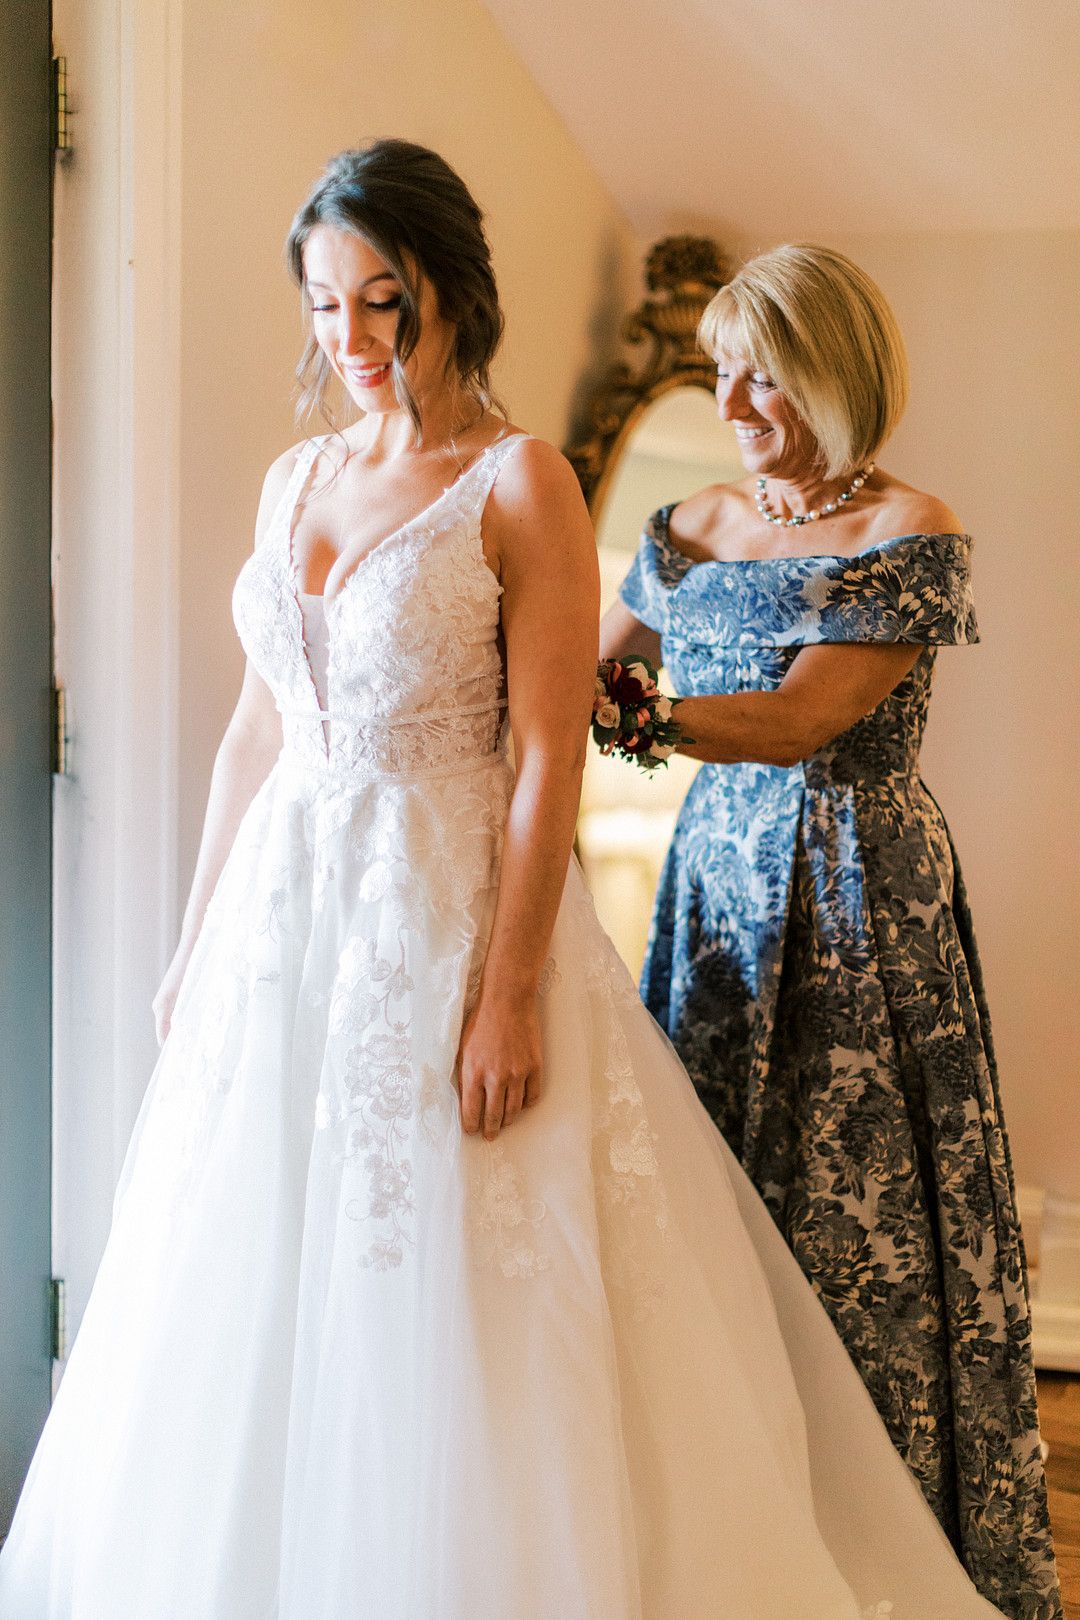 Mom helping bride with her dress